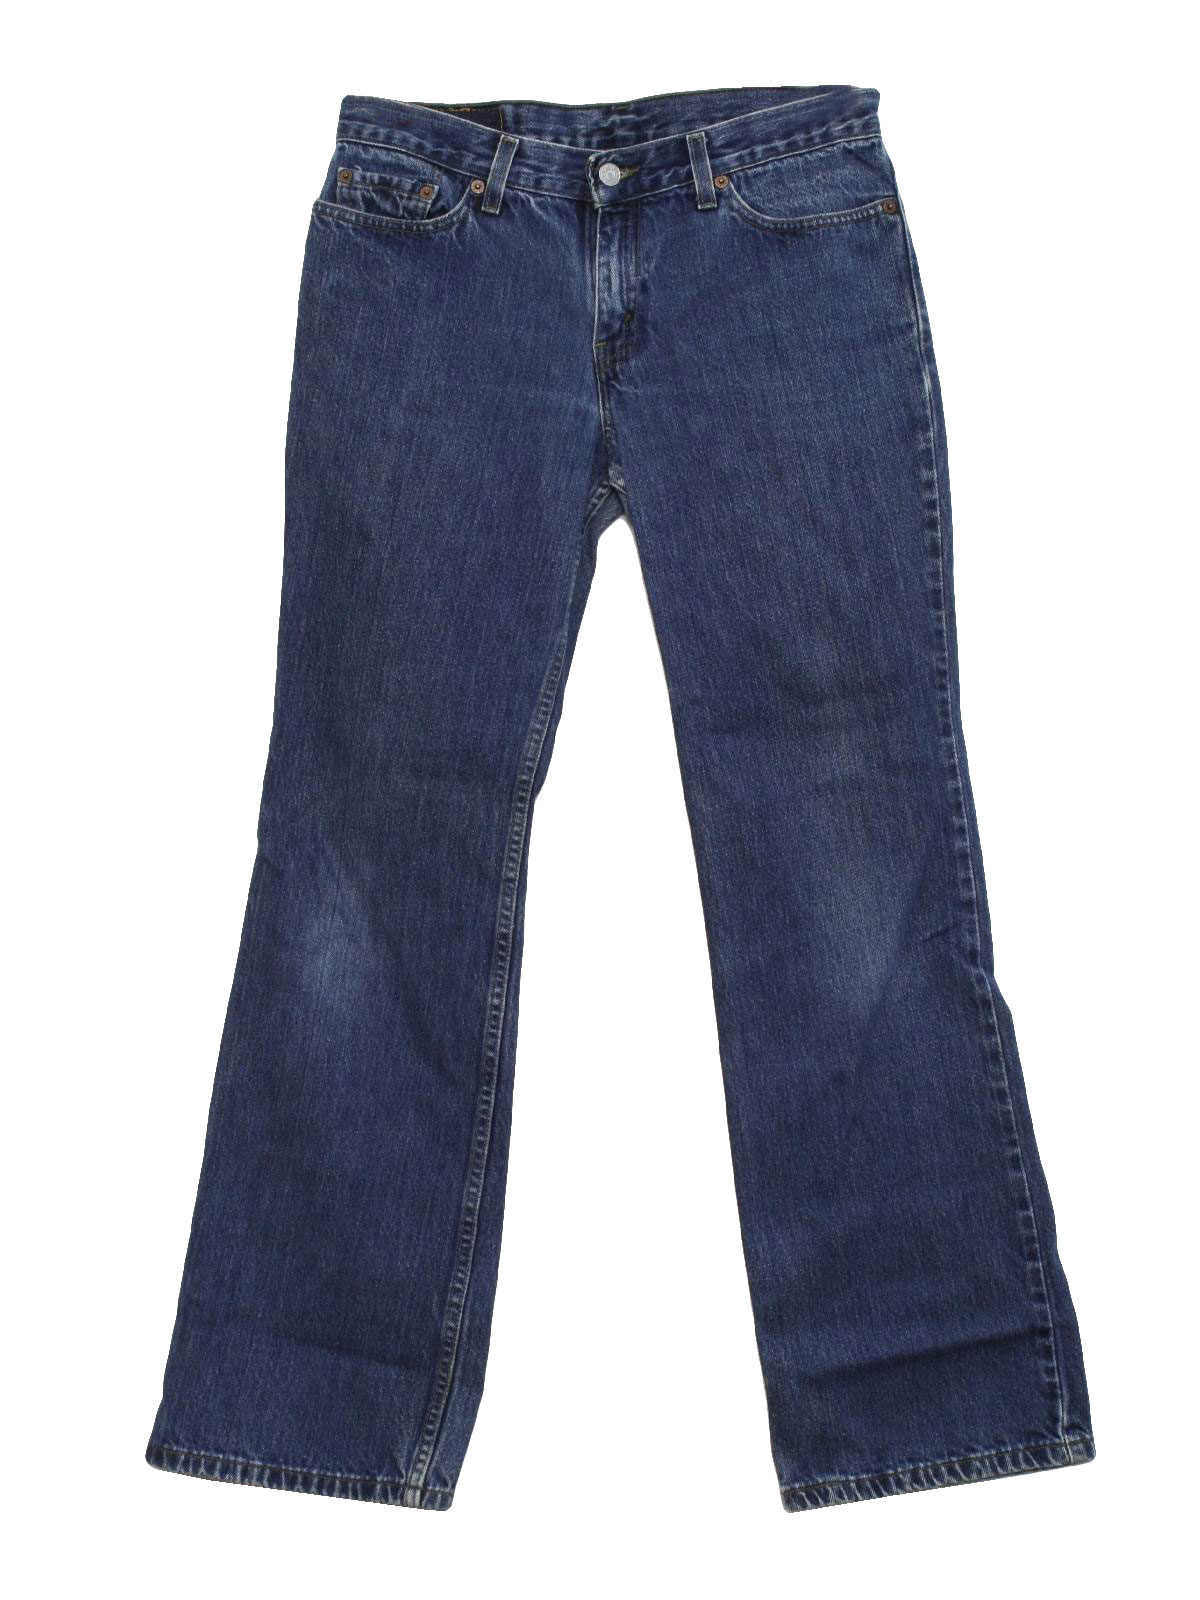 Levis 1990s Vintage Flared Pants / Flares: 90s -Levis- Mens faded ...